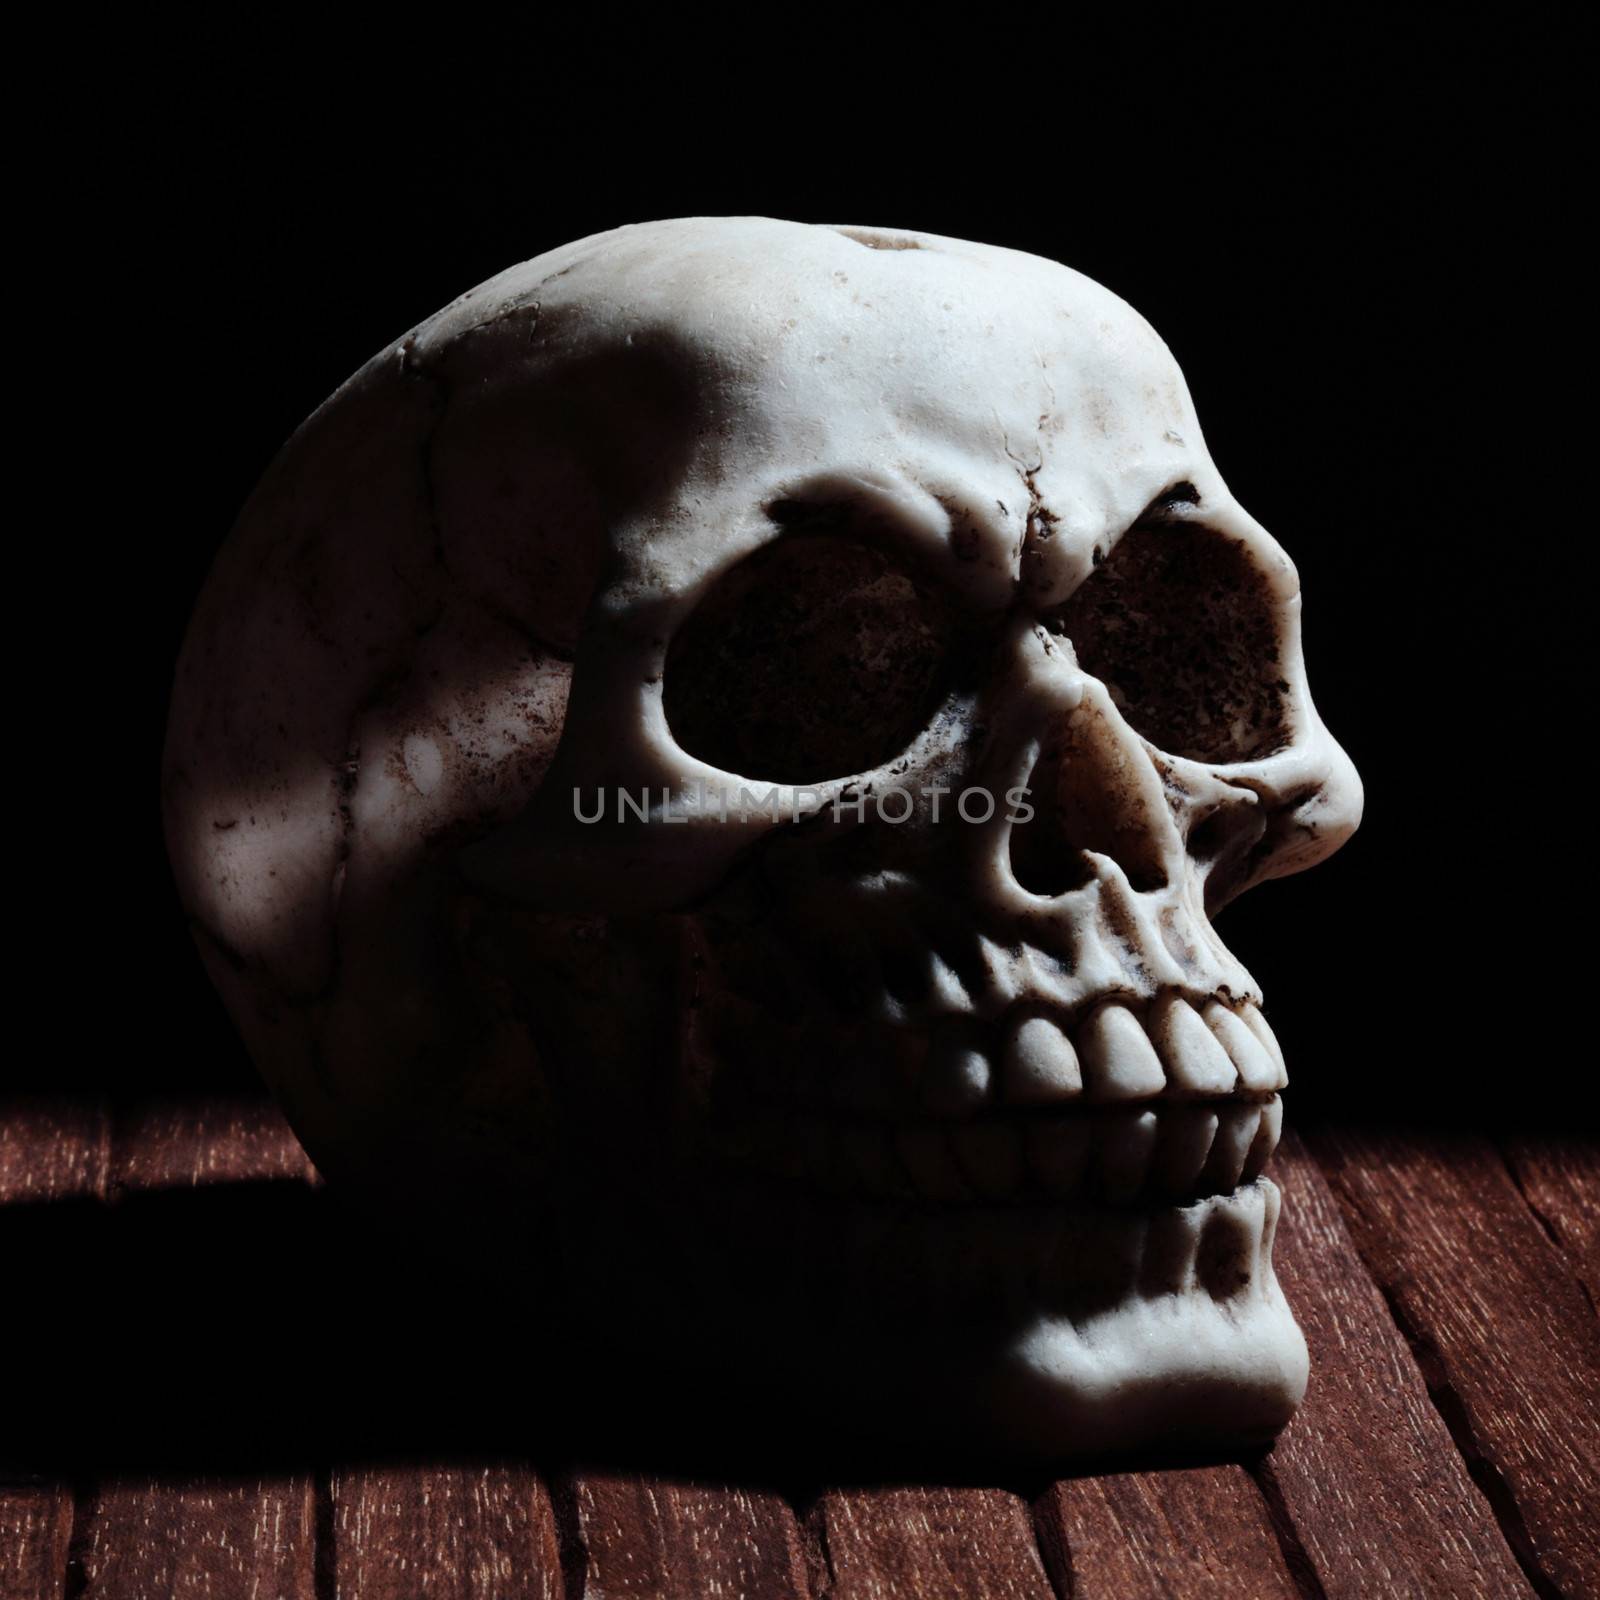 macabre scene with human skull